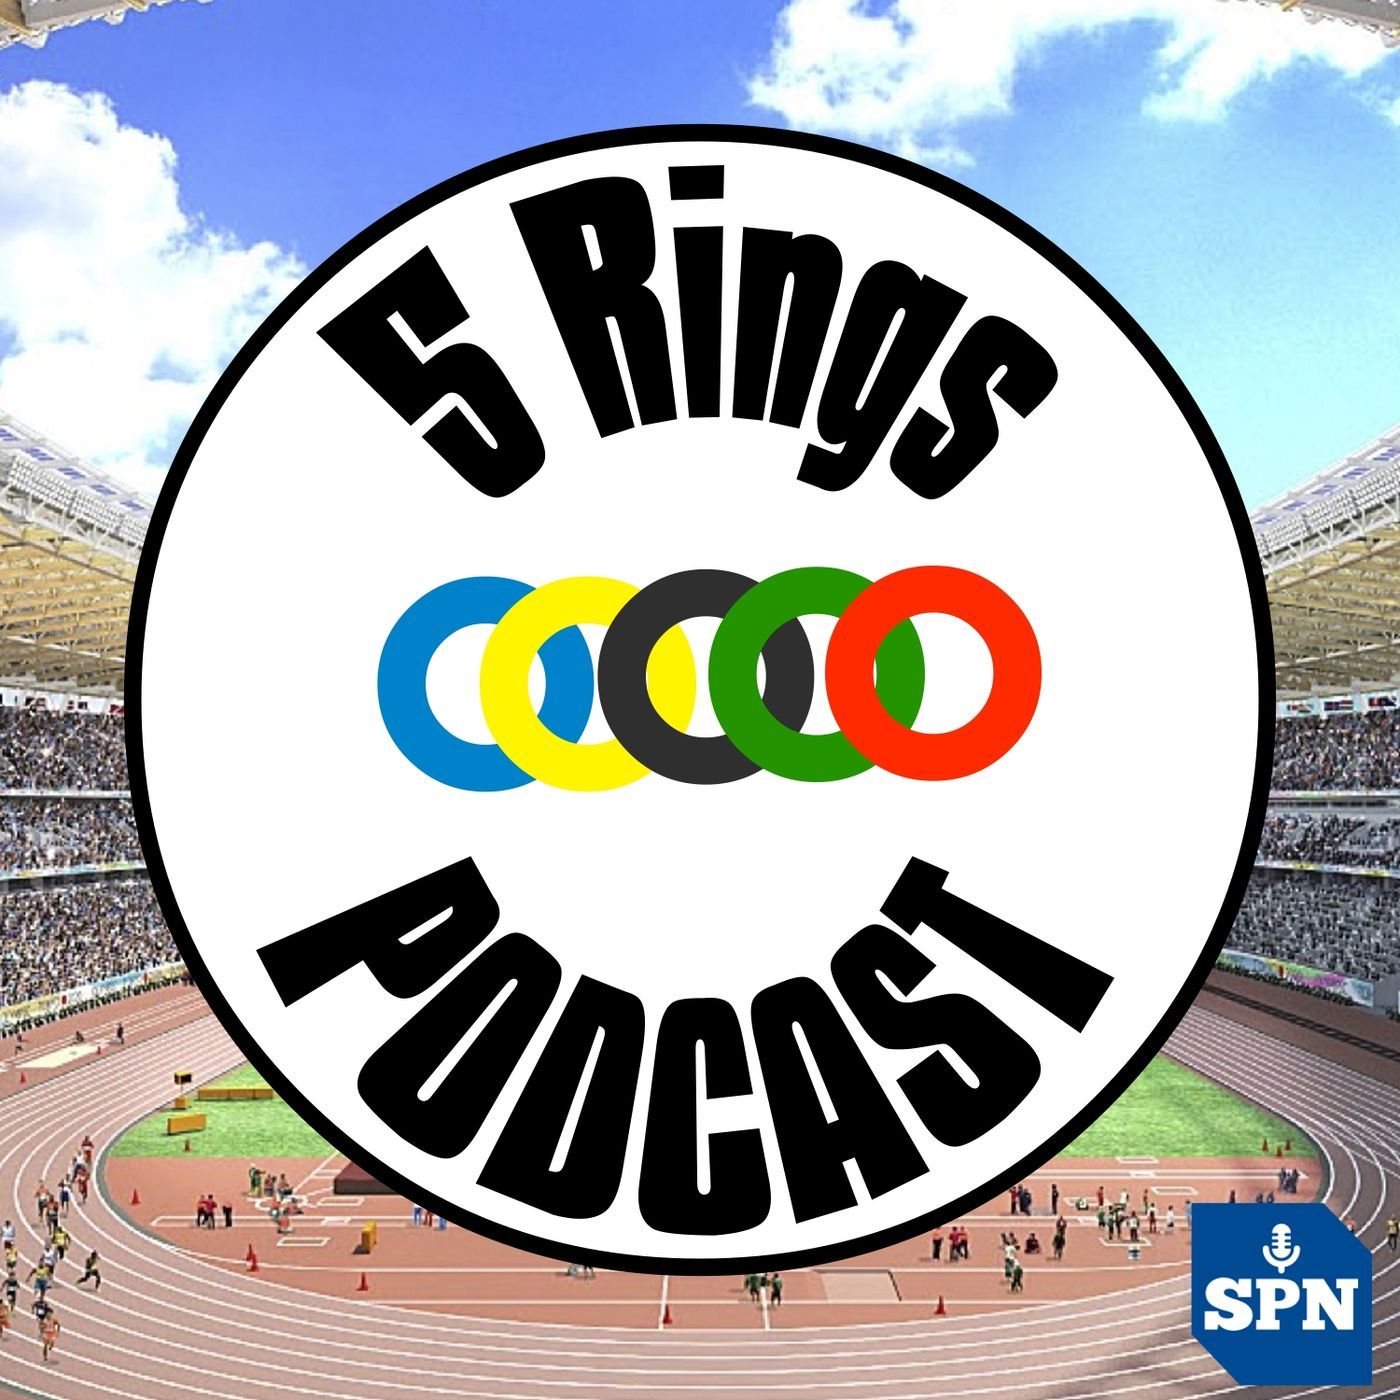 5 Rings Podcast - Daily Coverage of Tokyo 2020 with Kevin Laramee and Duane Rollins - Day 15 Review